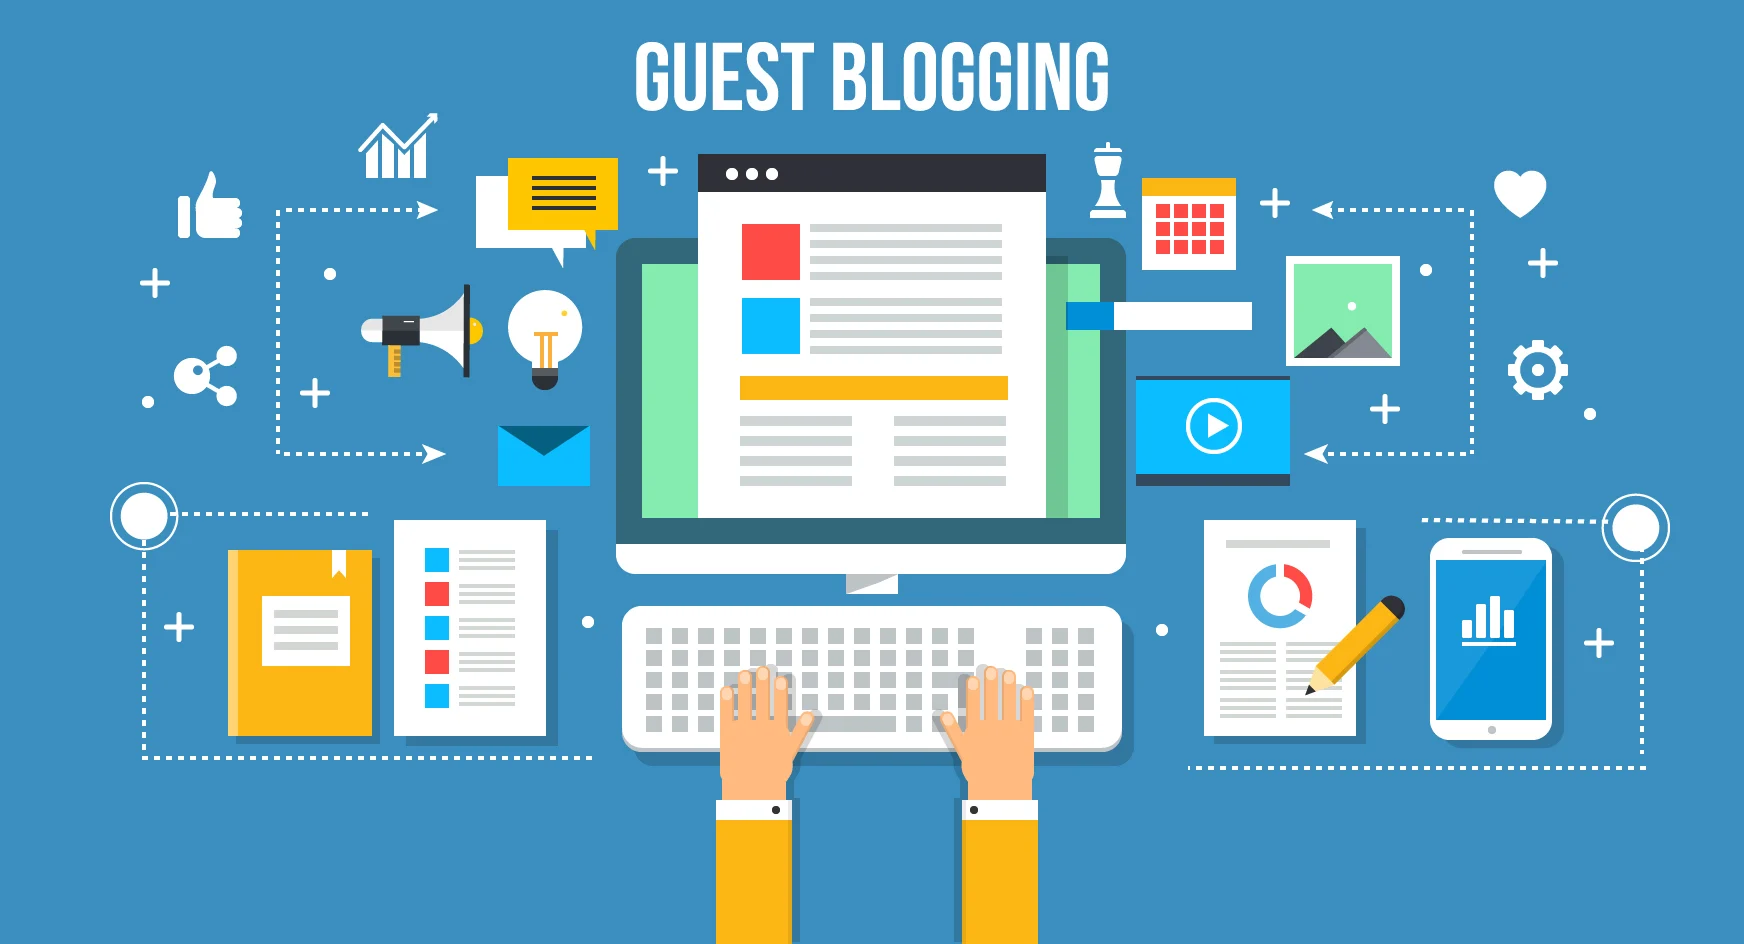 Why Guest Blogging is Important?